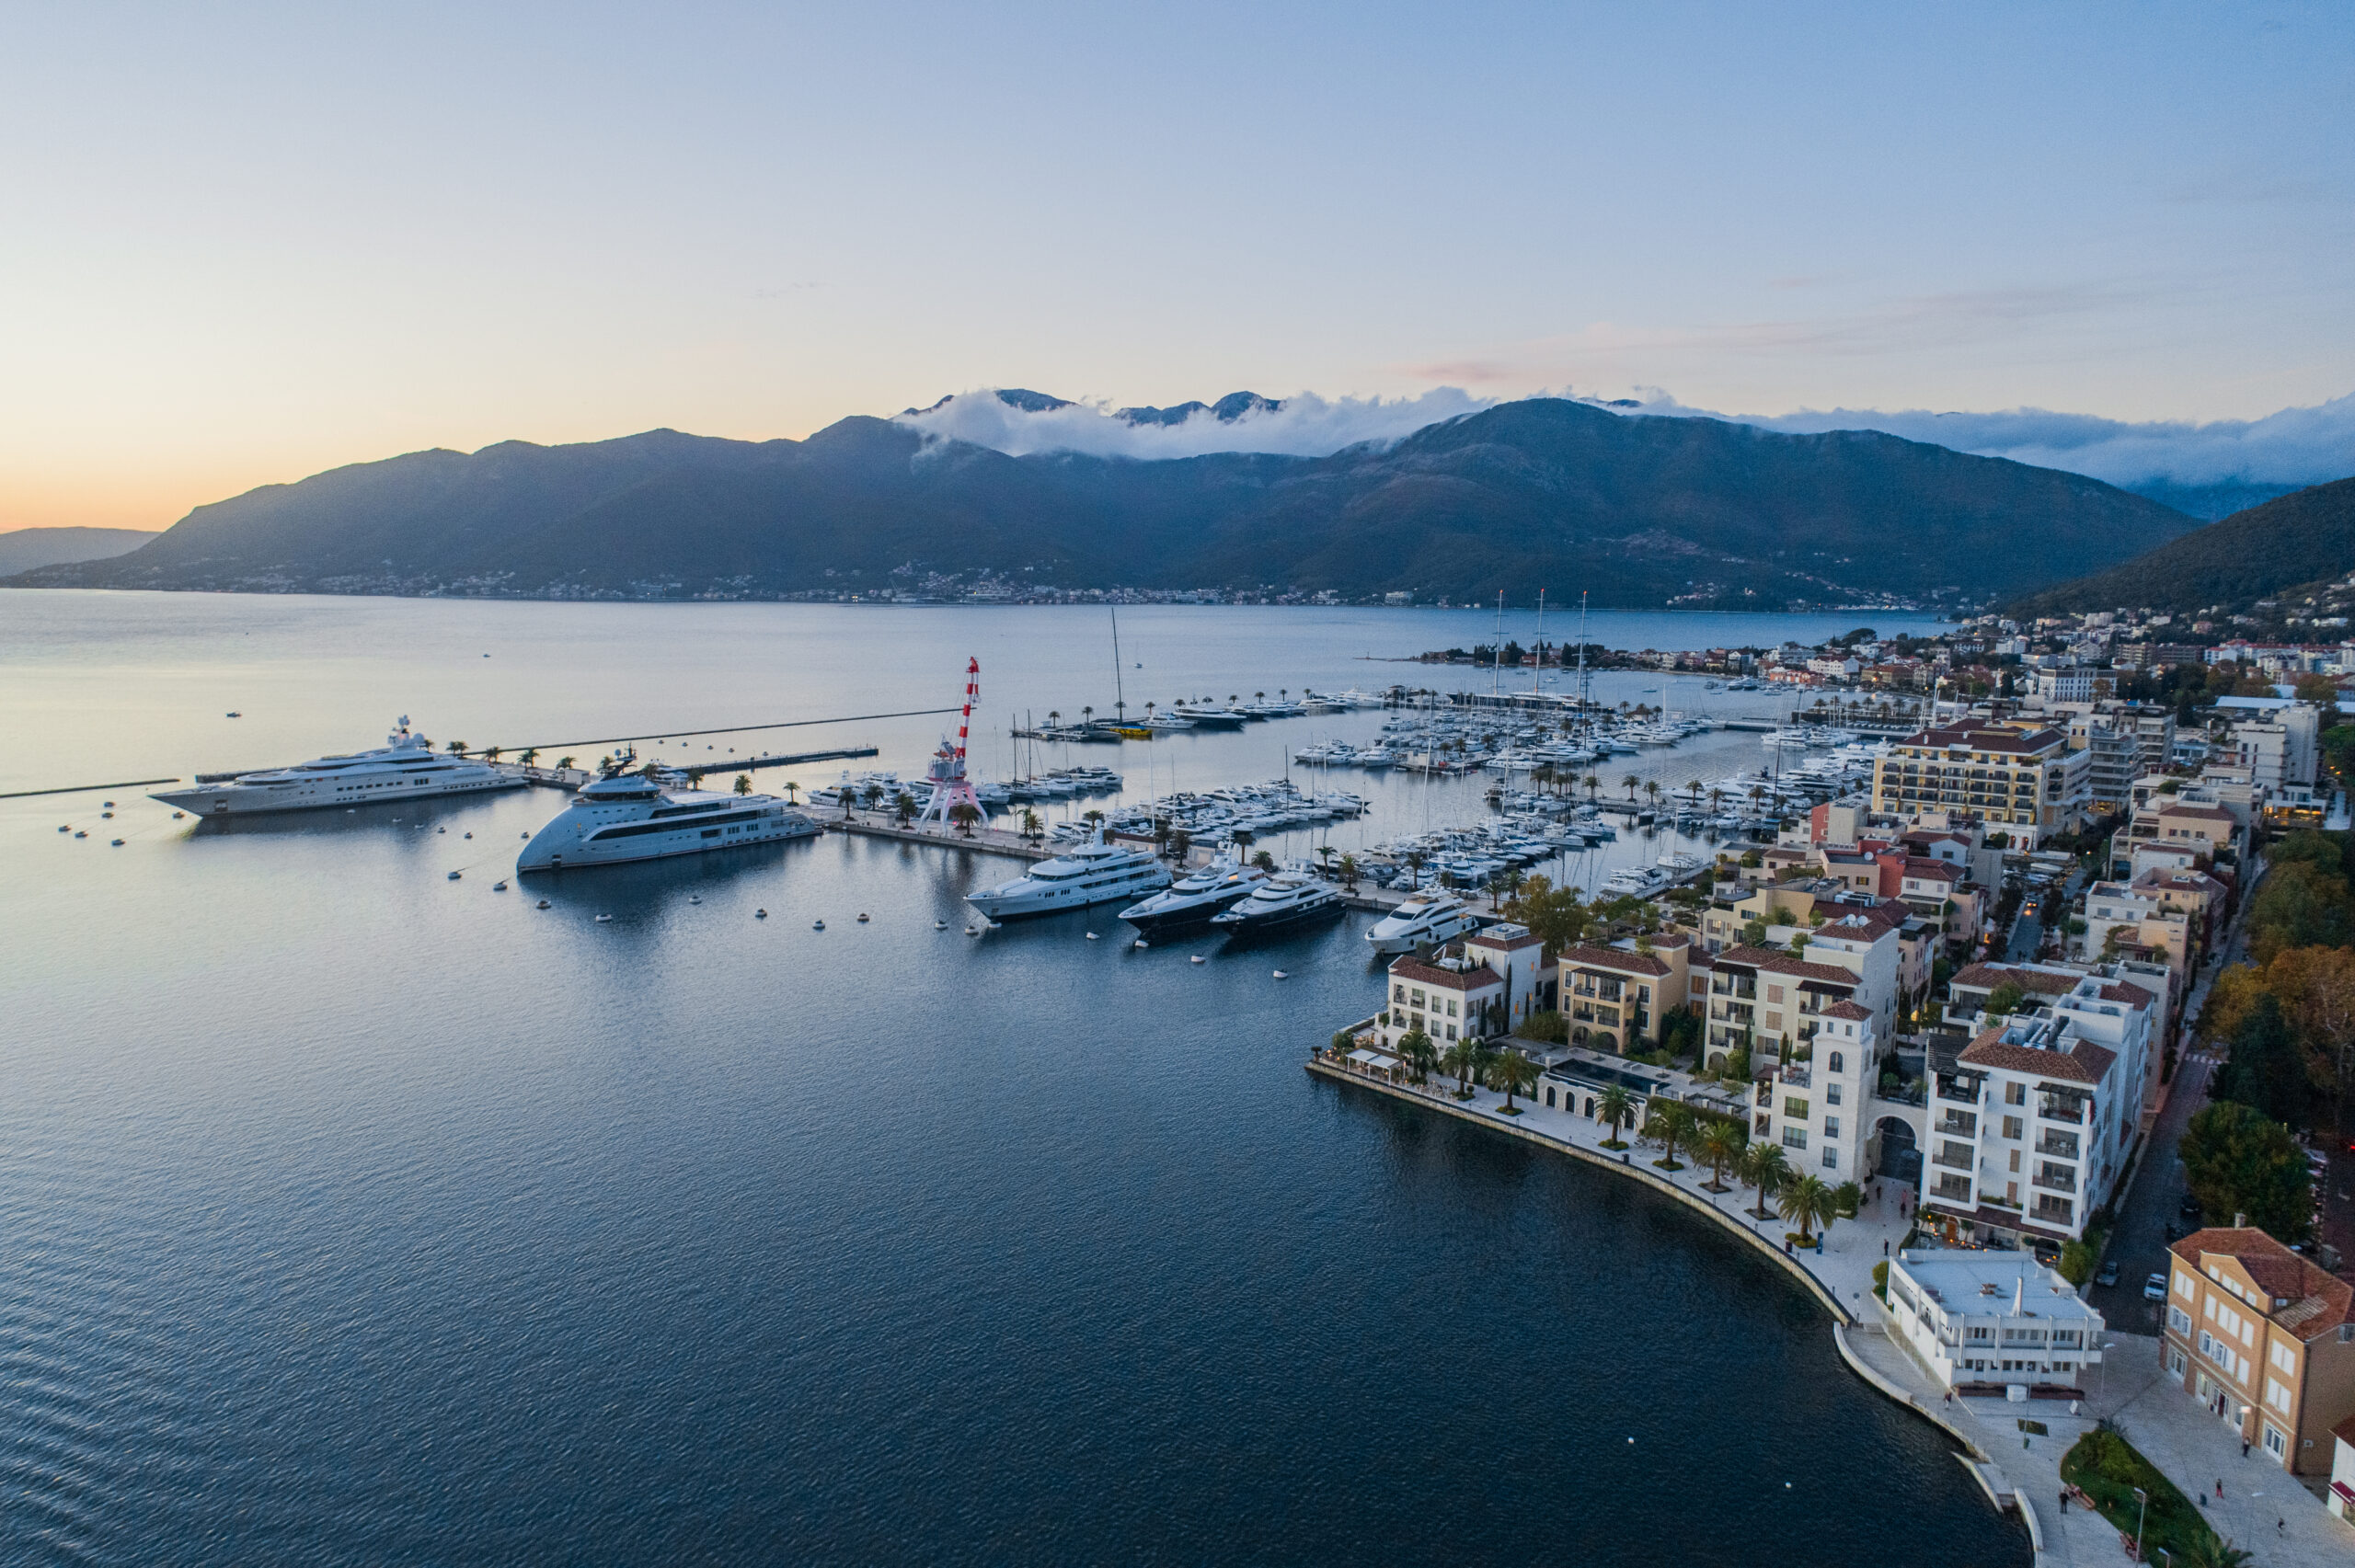 wide angle shot of Porto Montenegro with mountains in background